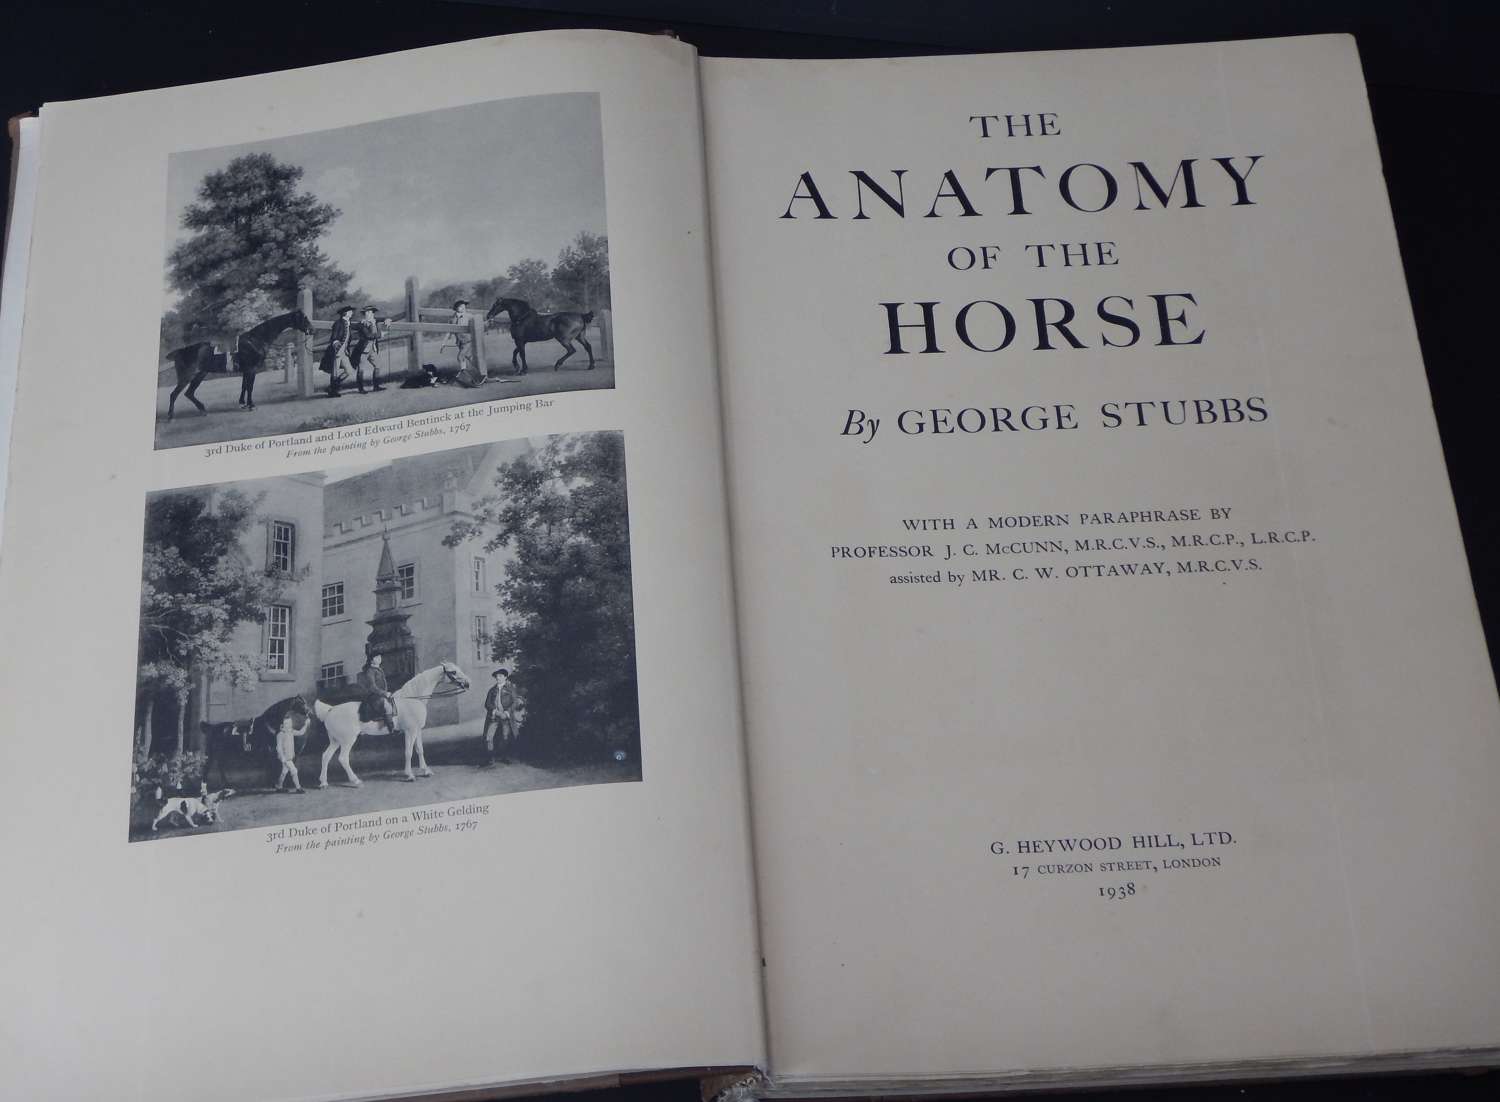 AMAZING The Anatomy of a Horse by George Stubbs - 4th edition 1938